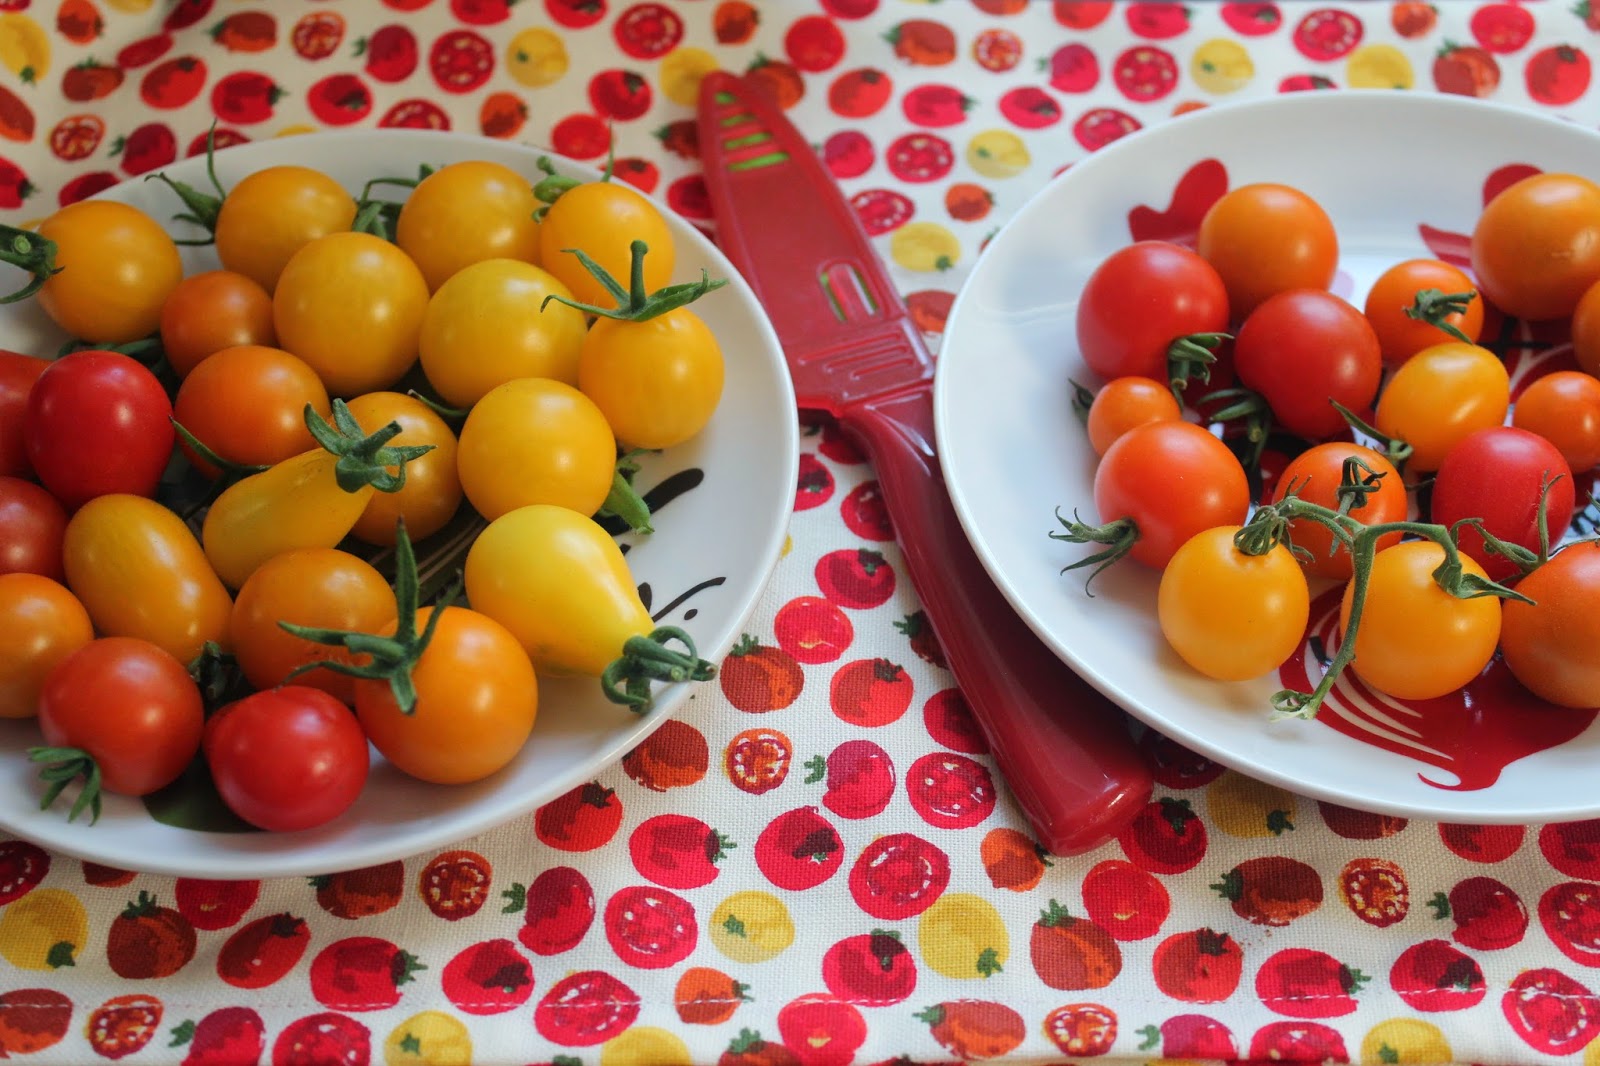 Tomatoes from Megan from Delicious Dishings's garden